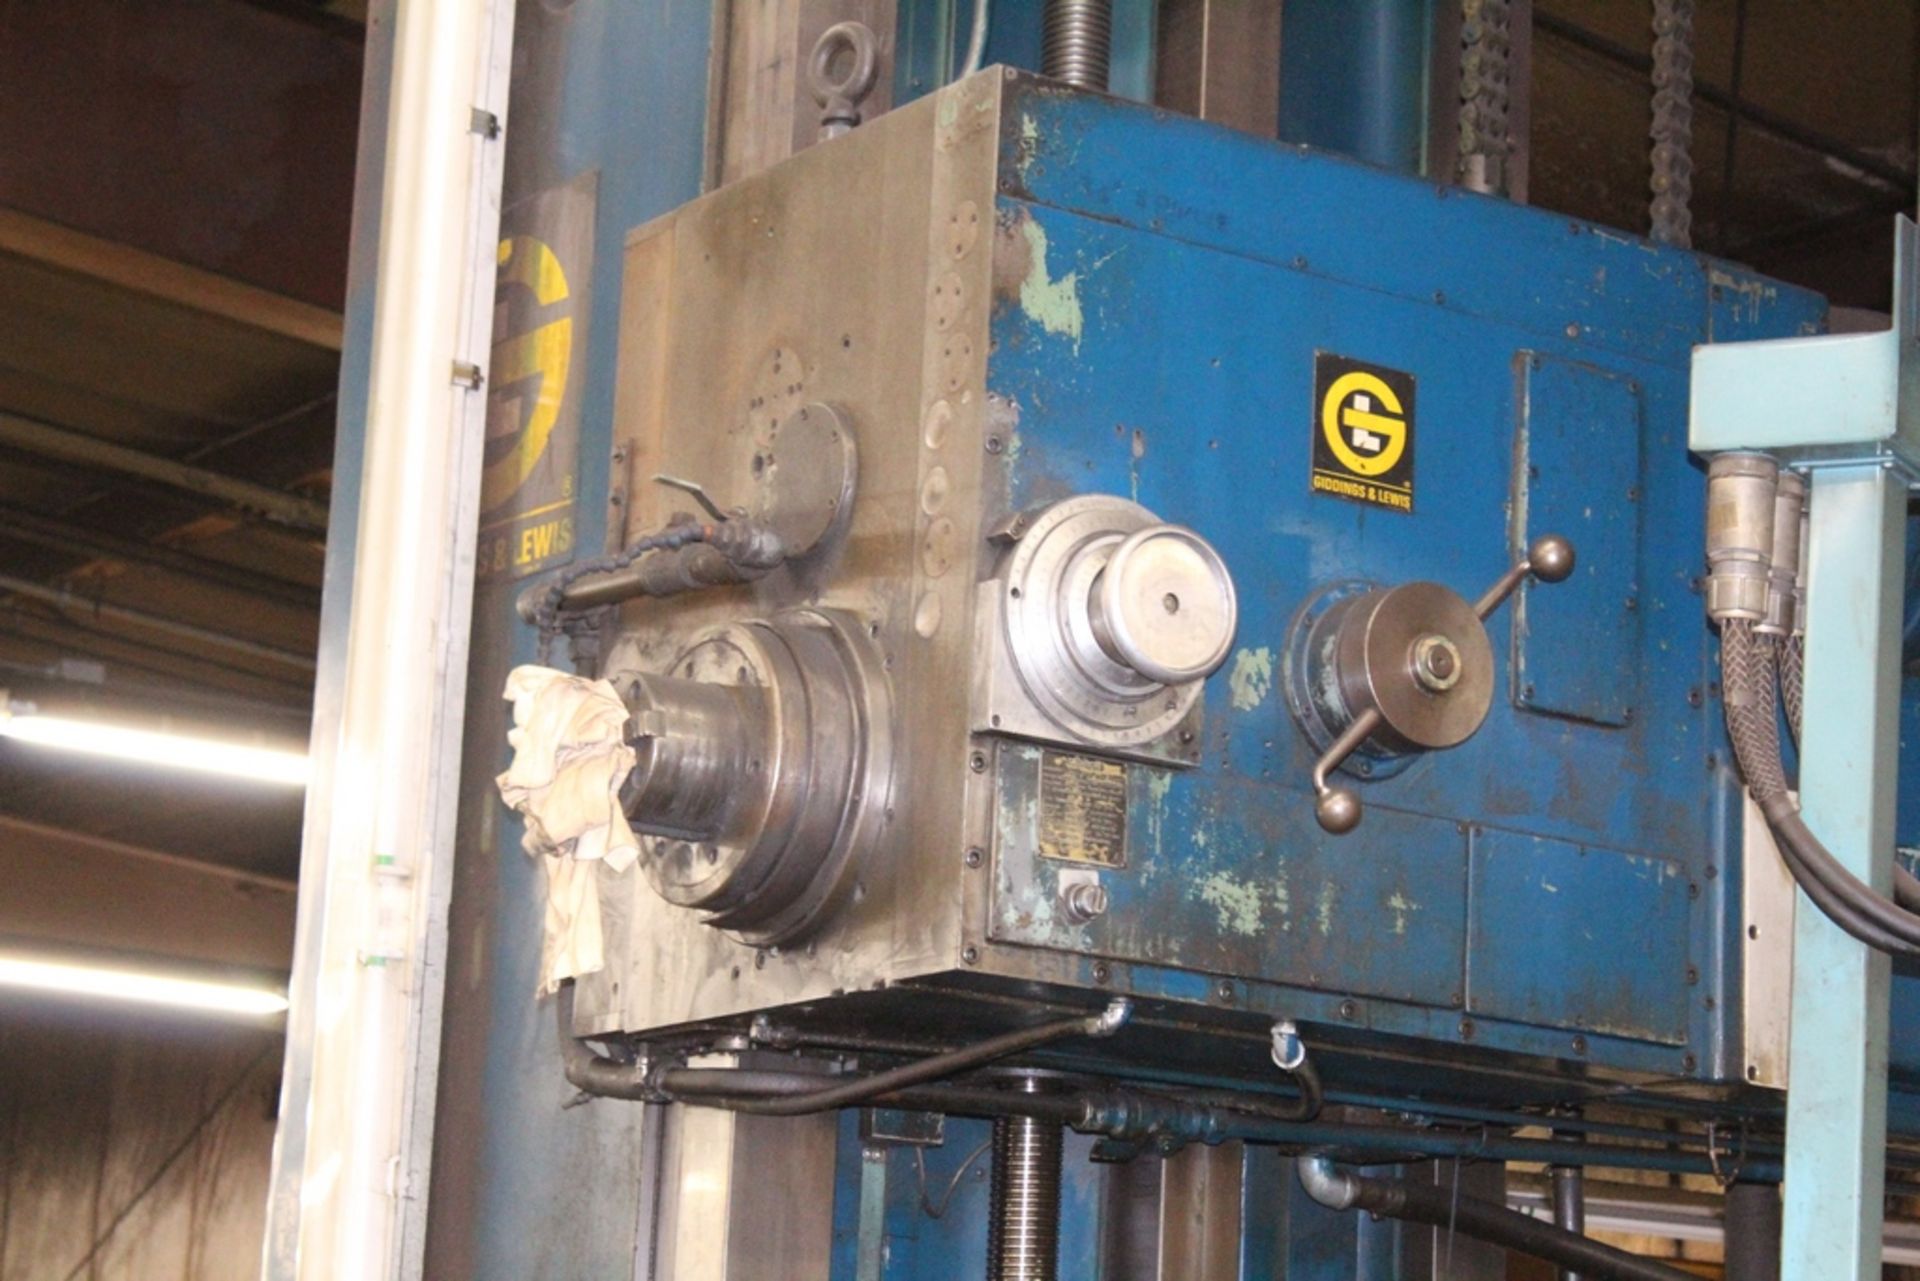 6” GIDDINGS & LEWIS MODEL 70-H6-T TABLE TYPE HORIZONTAL BORING MILL, 60” X 144” TABLE, - Image 5 of 9